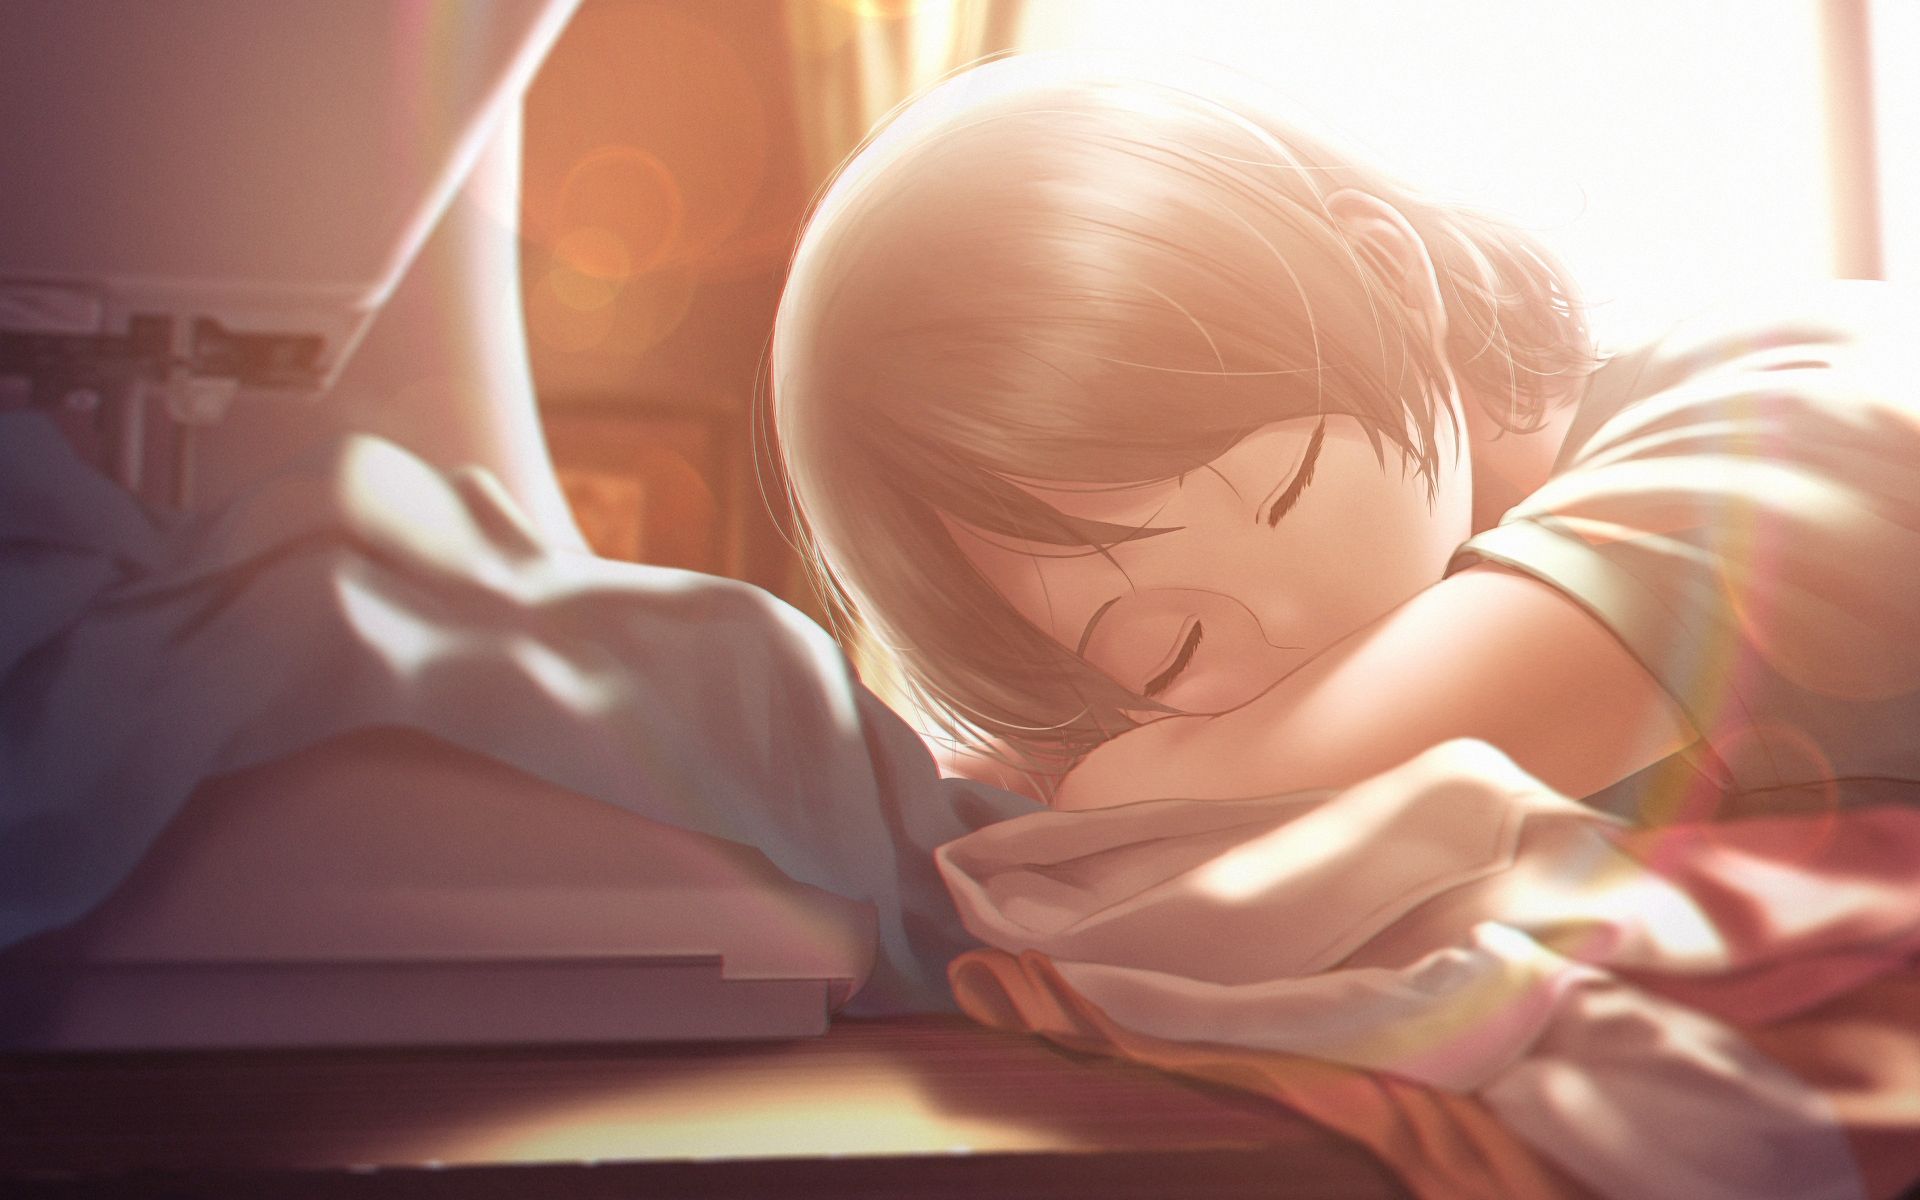 Desktop Wallpaper Watanabe You, Anime Girl, Sleeping, HD Image, Picture, Background, Umszhc